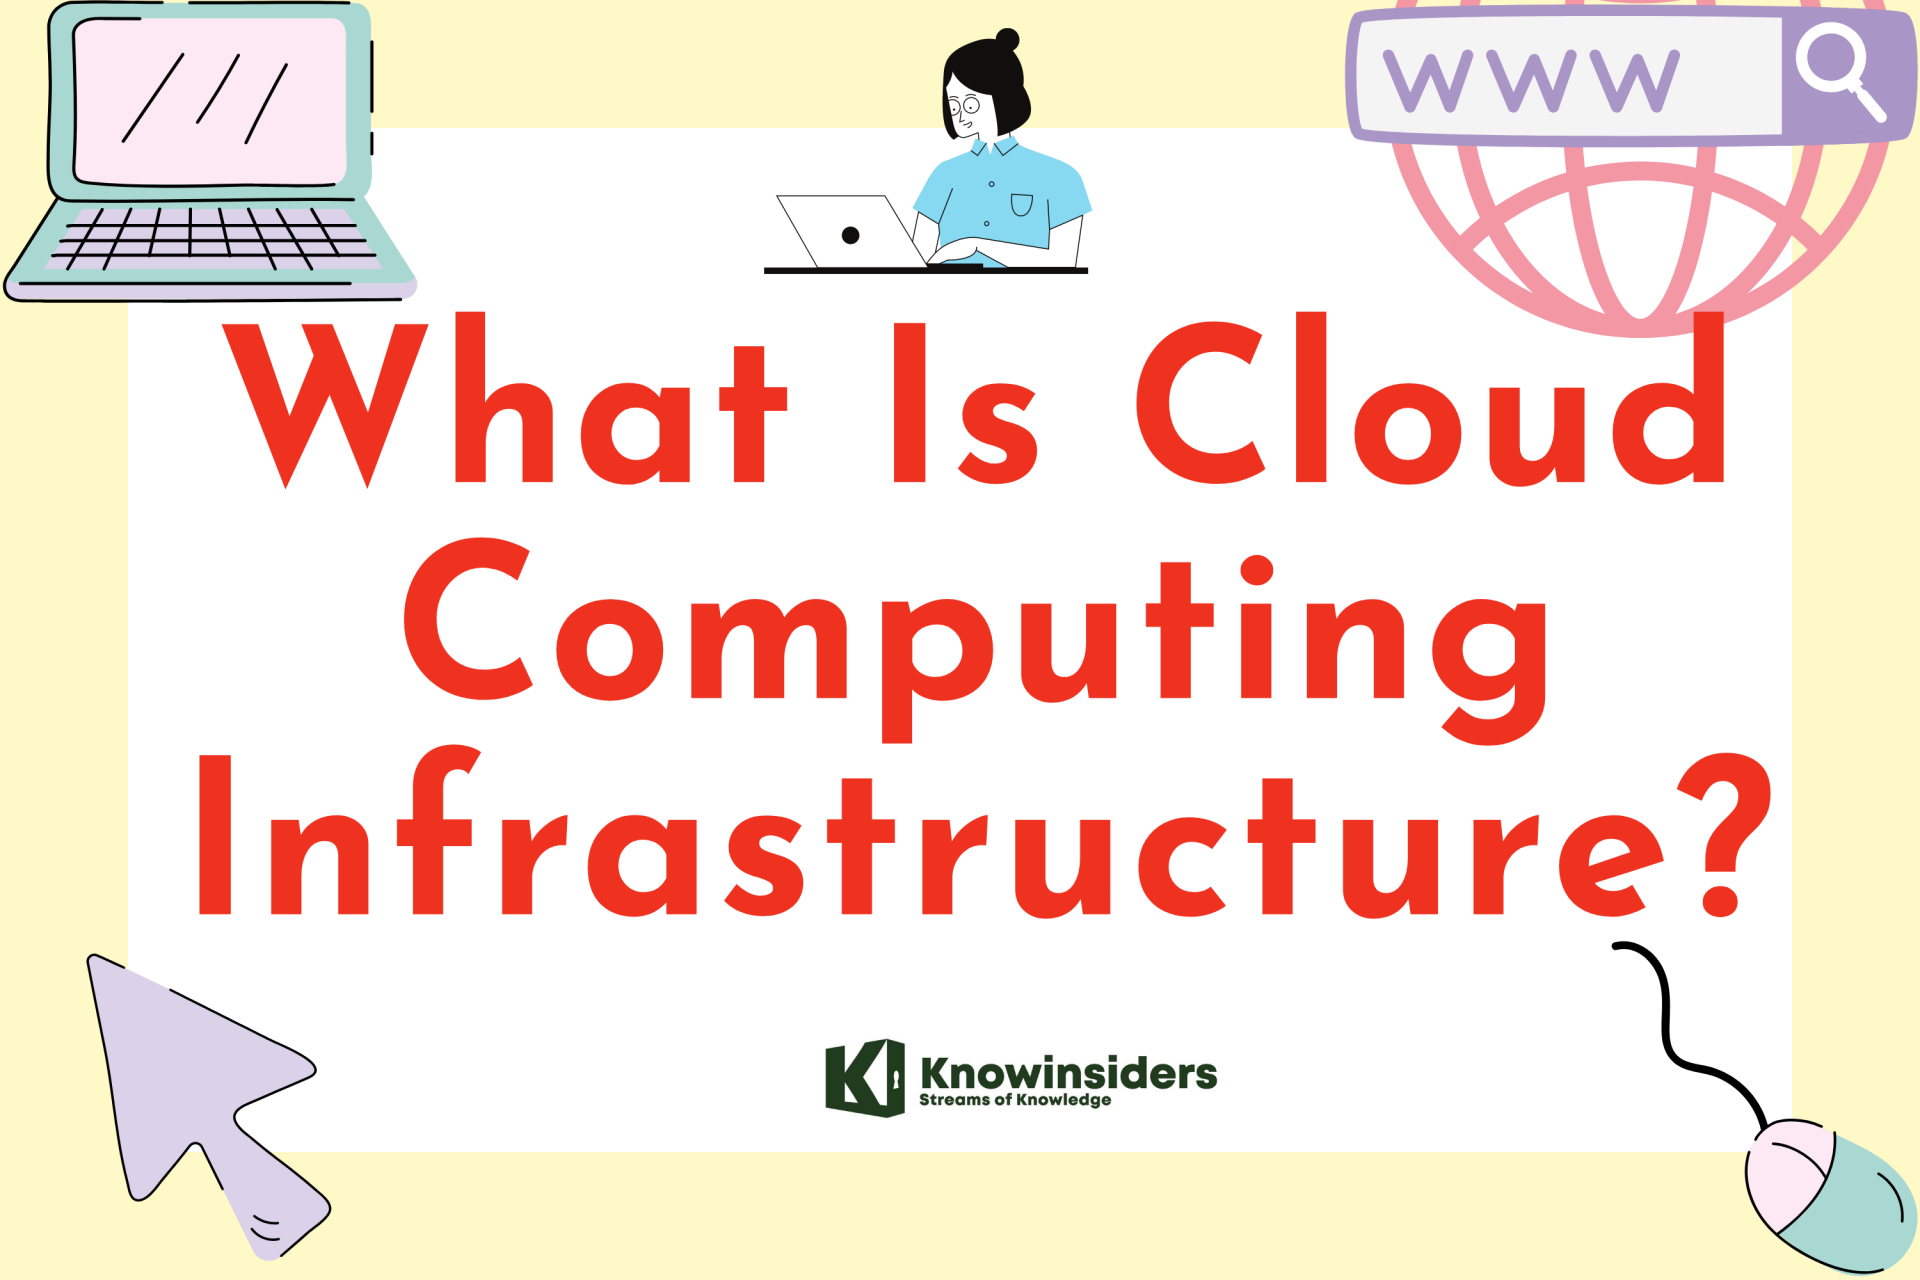 What Is Cloud Computing Infrastructure?